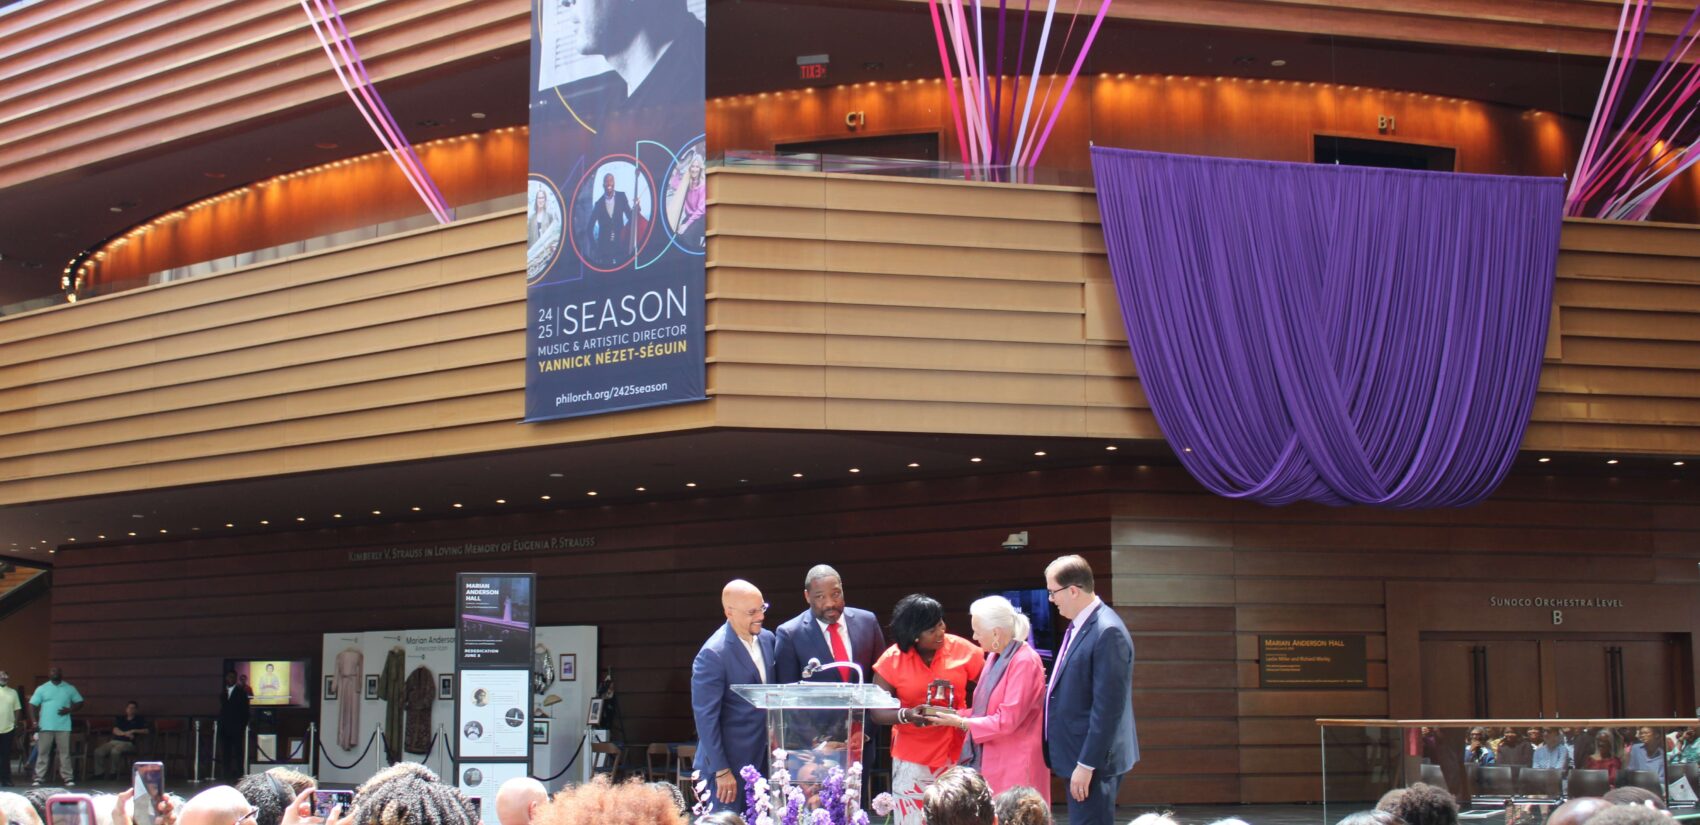 Ceremony at Kimmel Center for the unveiling of the new Marian Anderson Hall (Emily Neil/WHYY News)